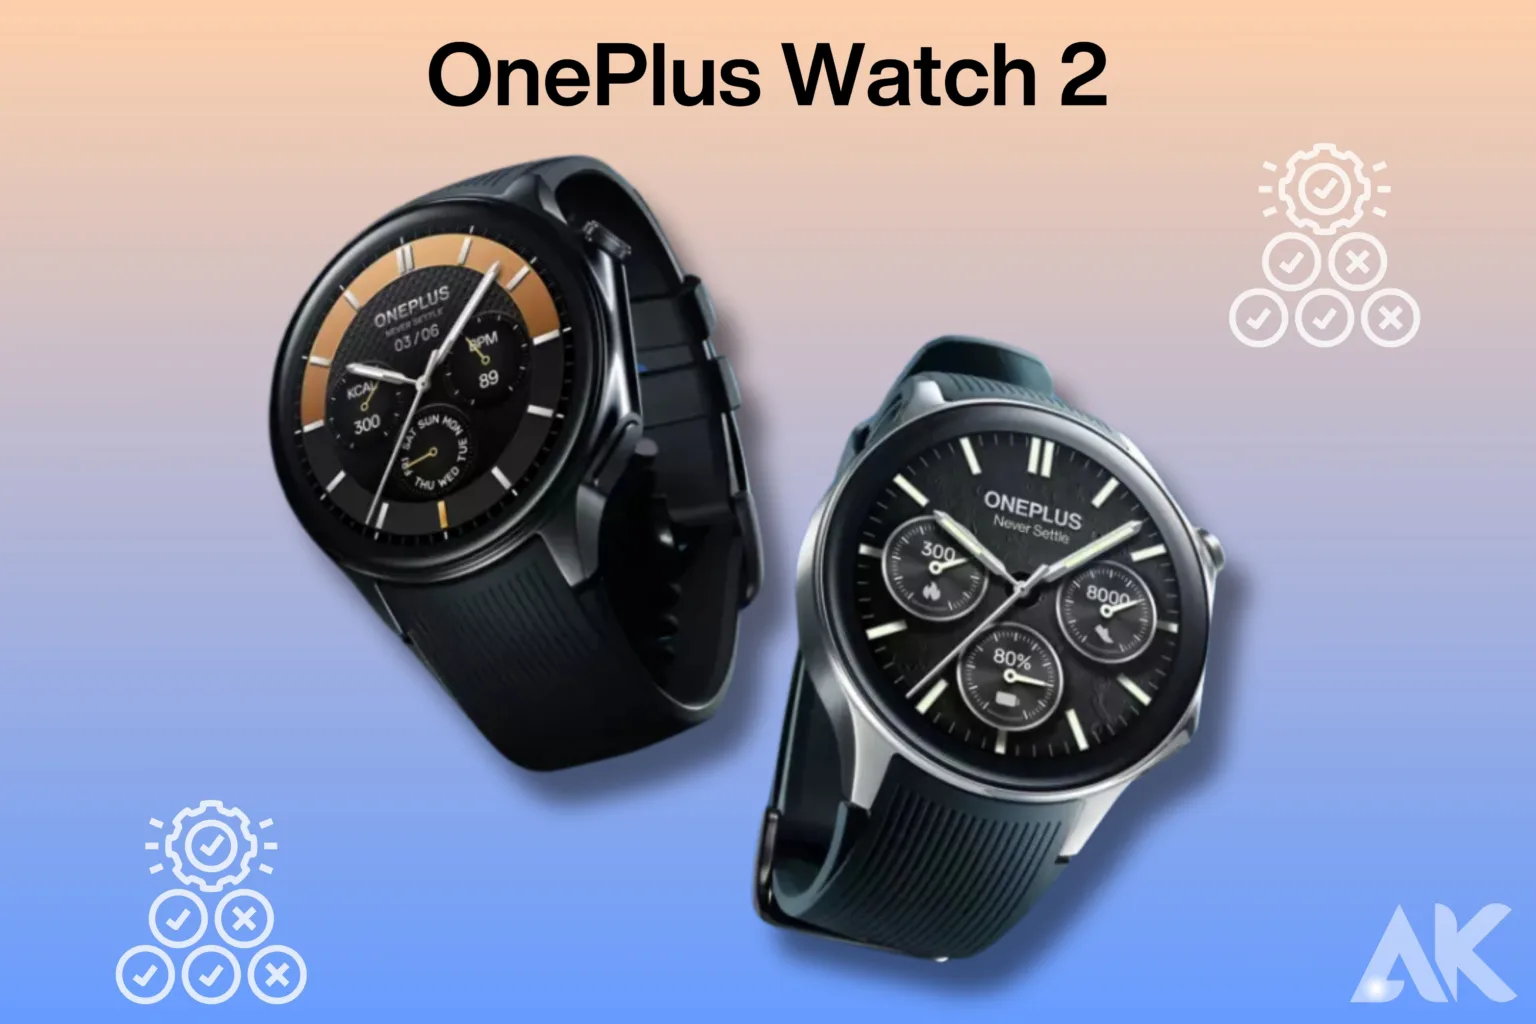 Complete OnePlus Watch 2 Specifications What’s Inside